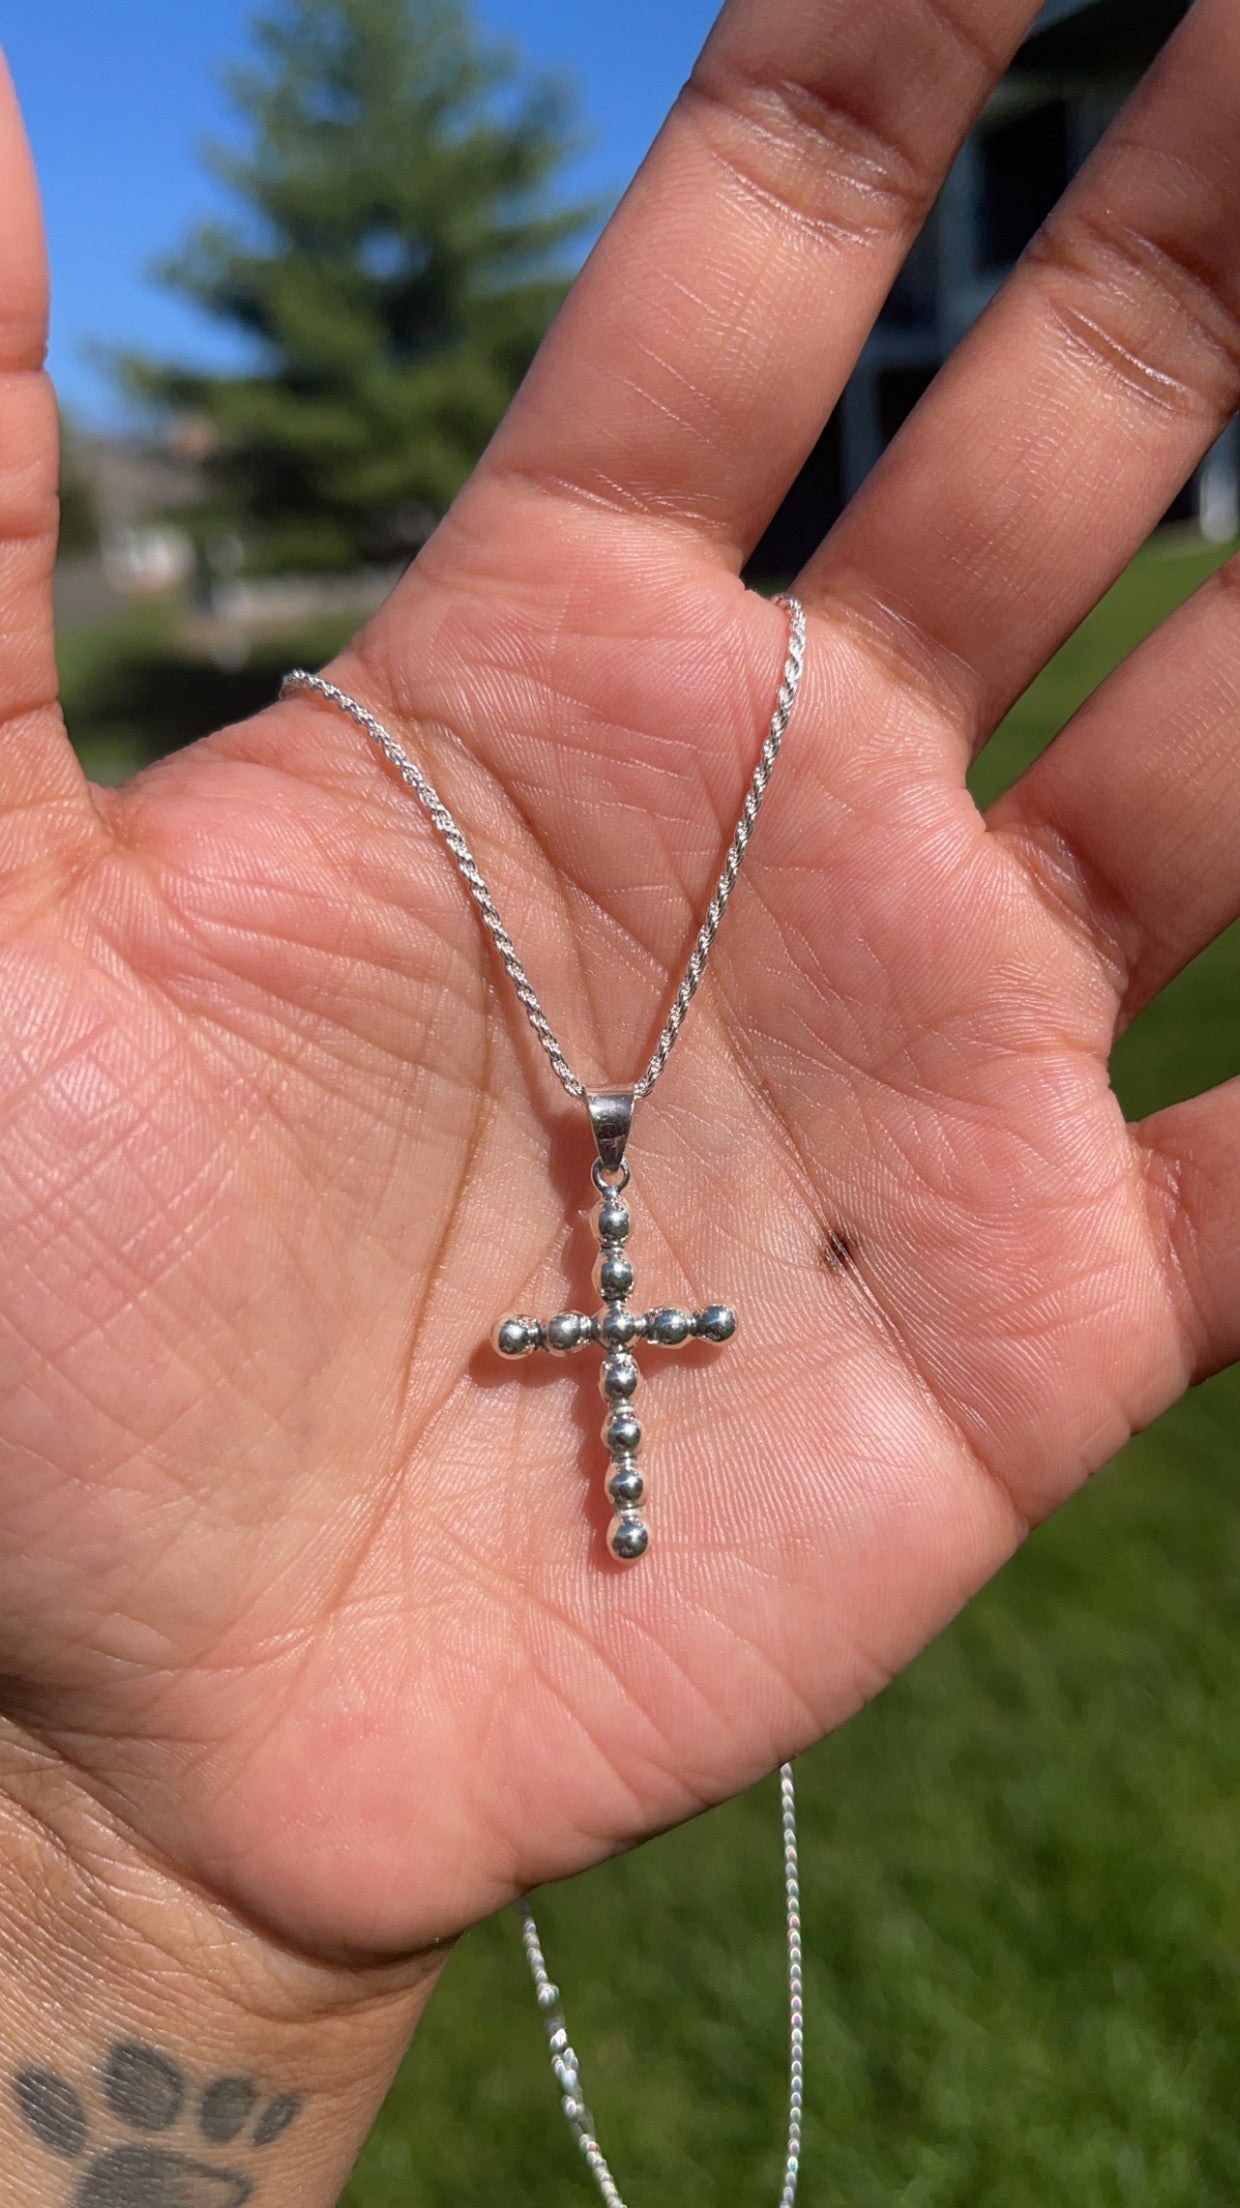 Atomic Cross Necklace